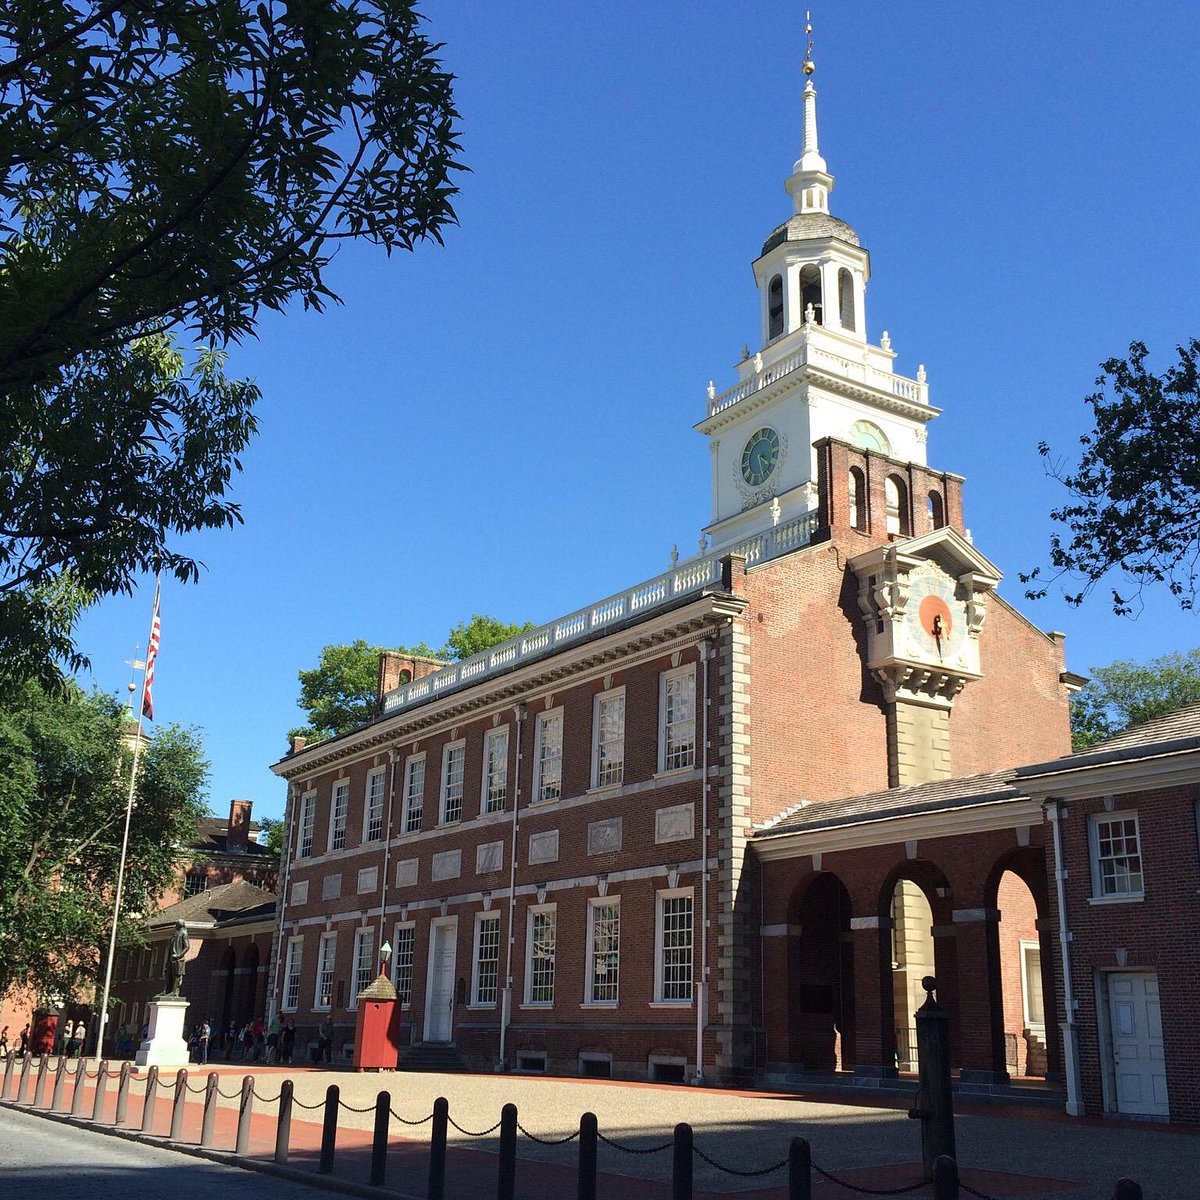 how long does independence hall tour take